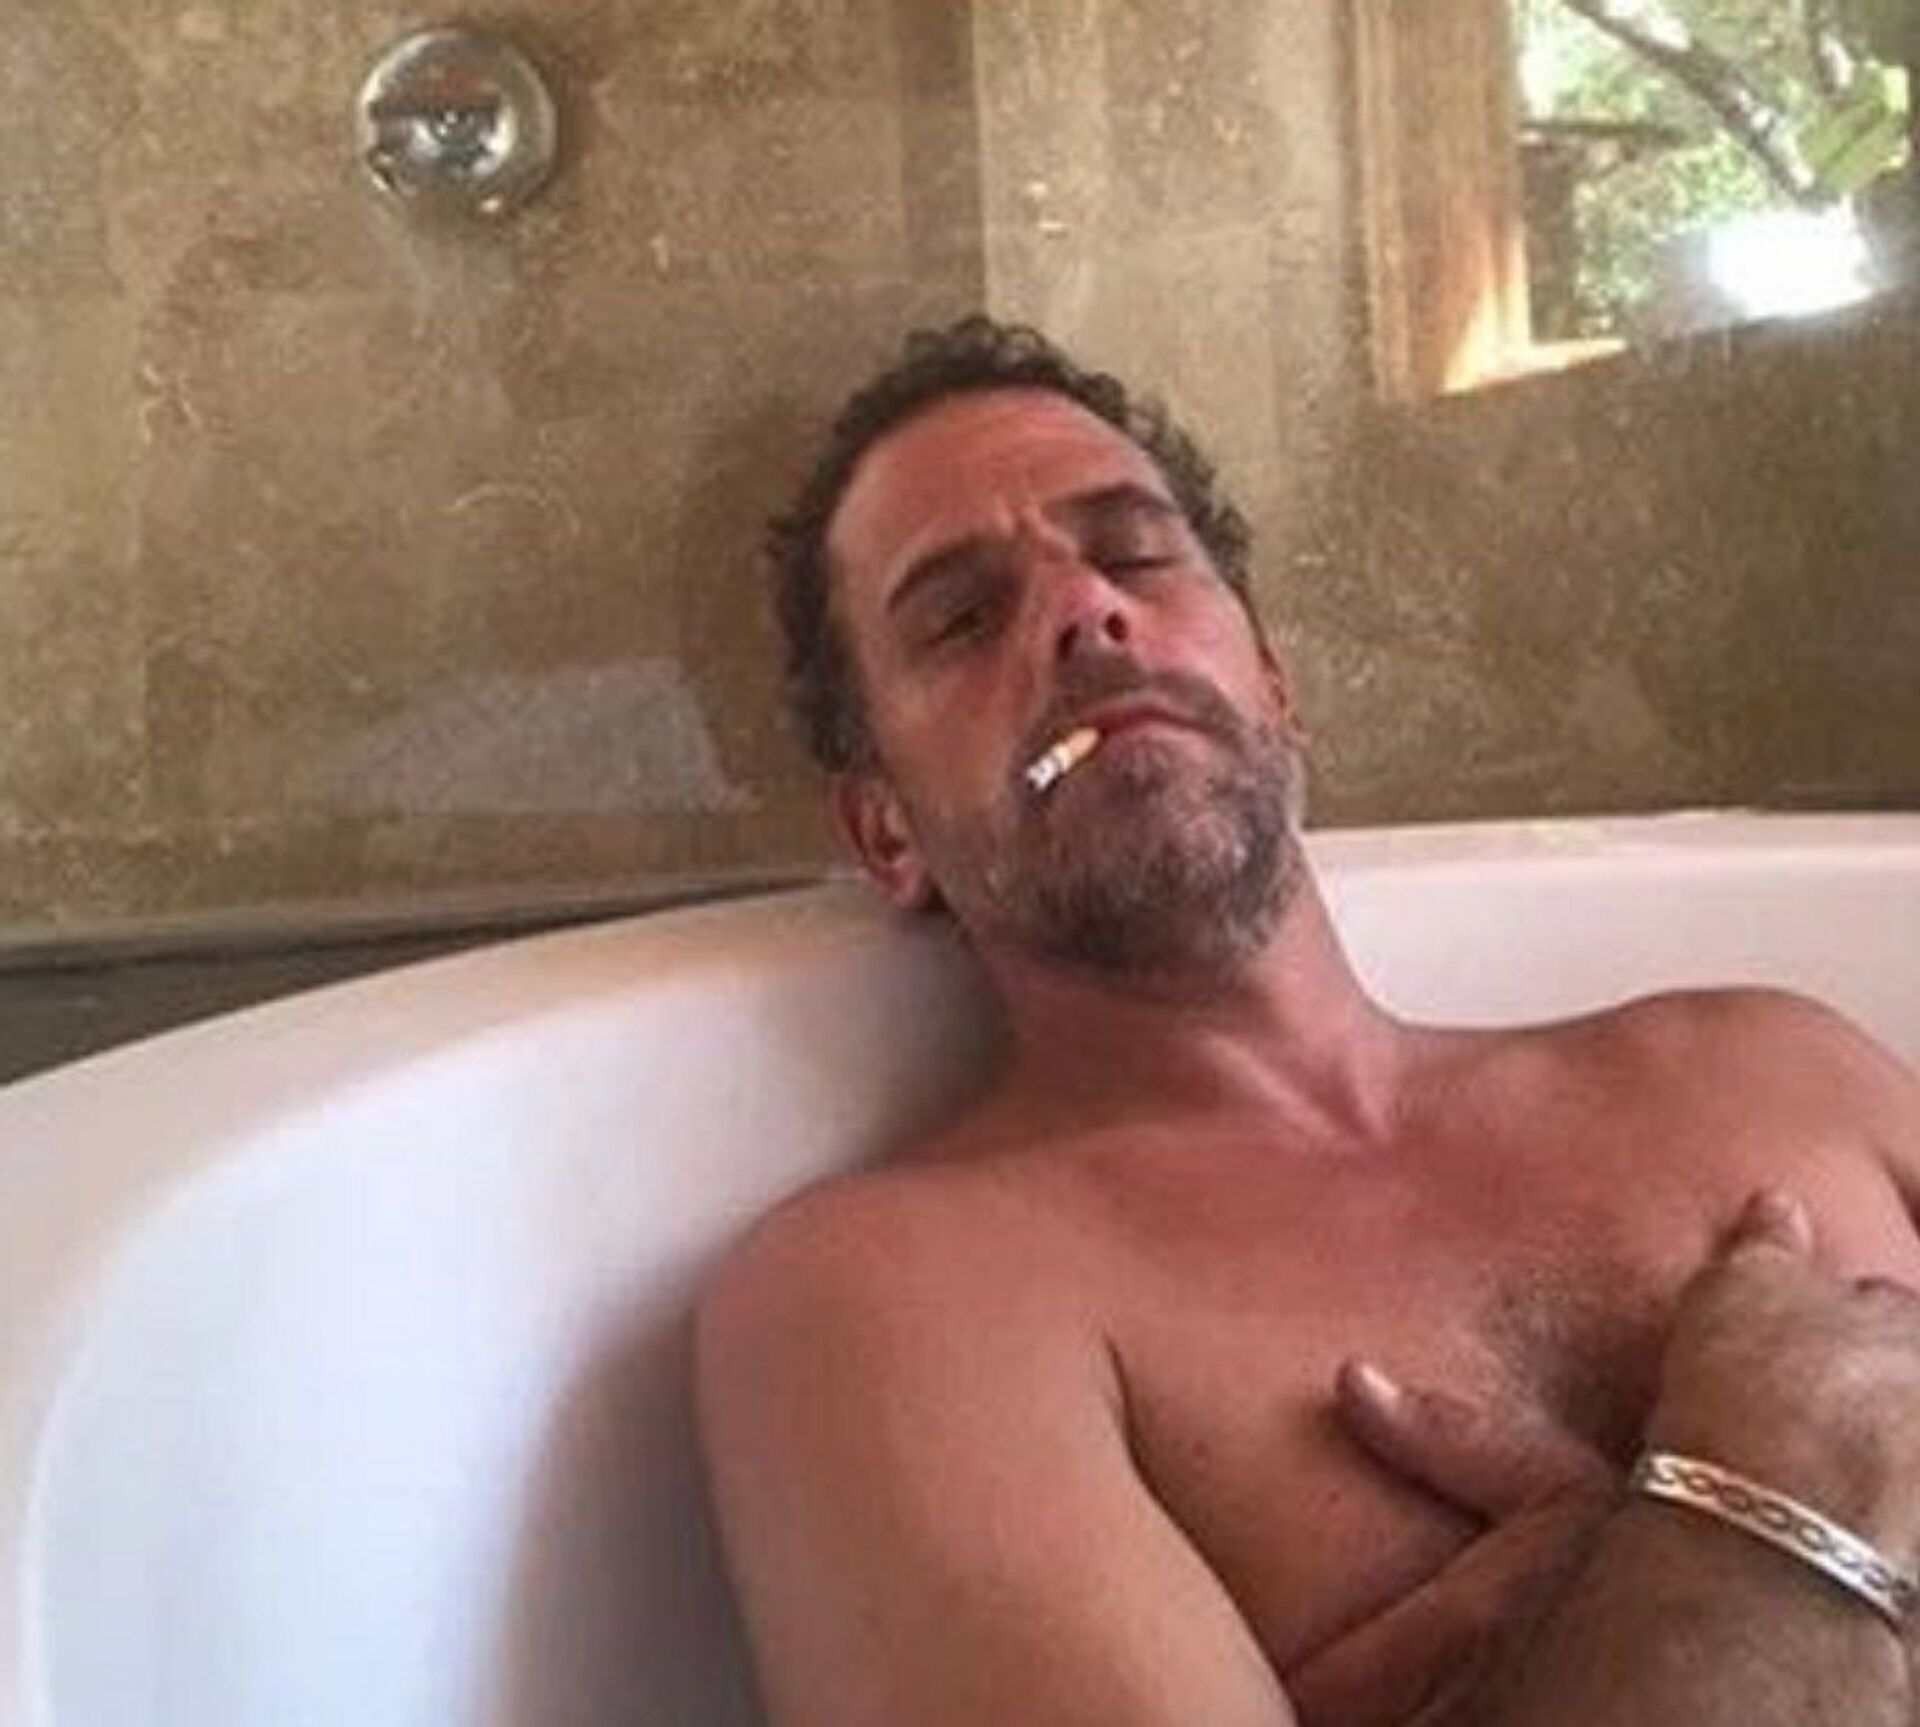 Photo of Hunter Biden relaxing in a bathtub, reportedly taken from a computer dropped off at a Delaware computer repair shop. - Sputnik International, 1920, 12.07.2022